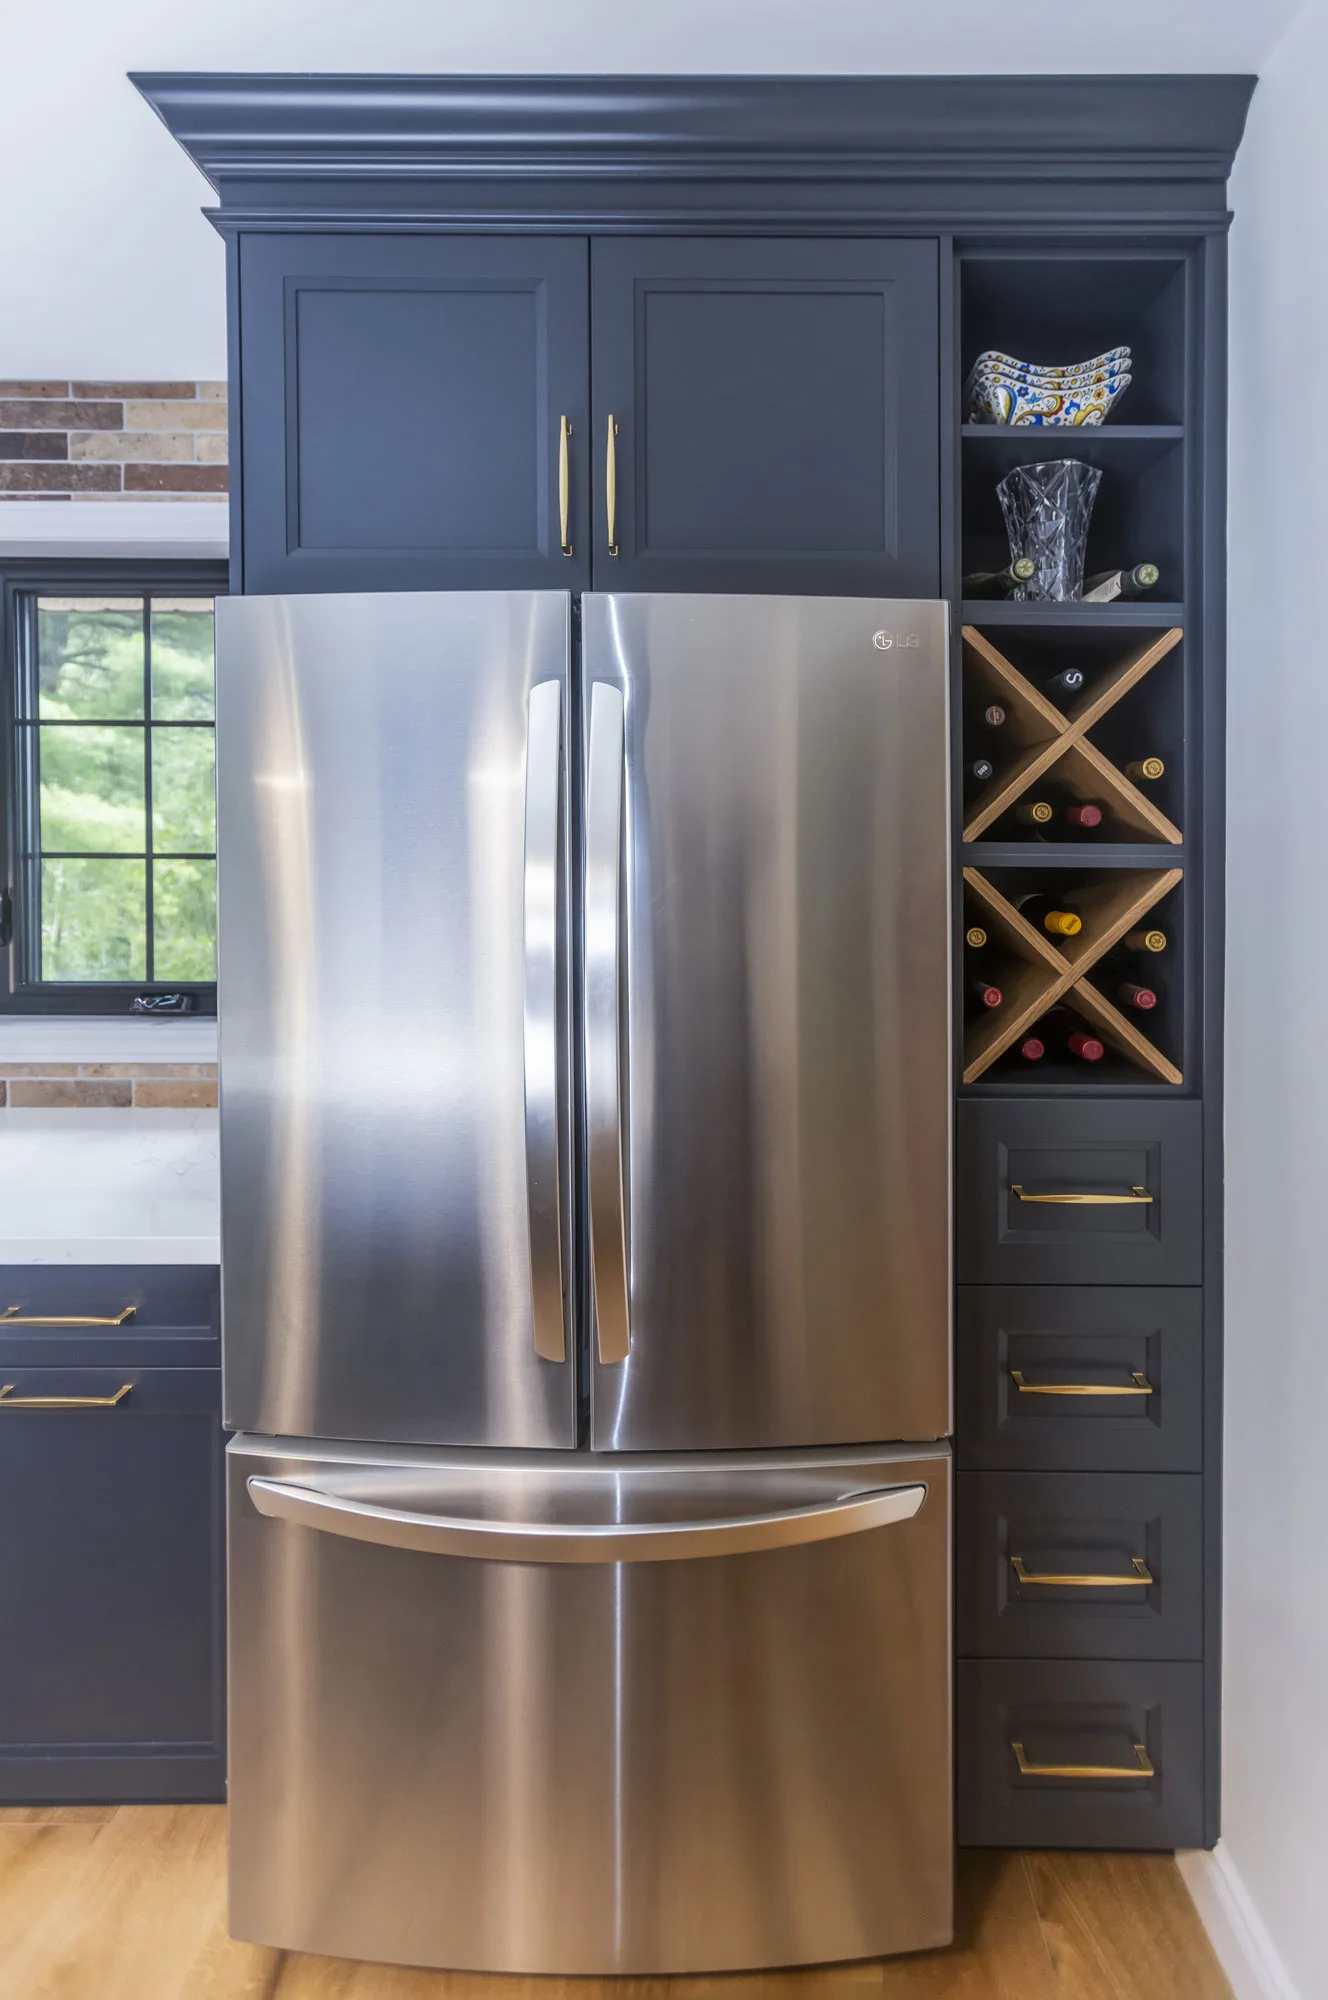 A close up of a stainless steal fridge with dark navy uppers on top and along the side.